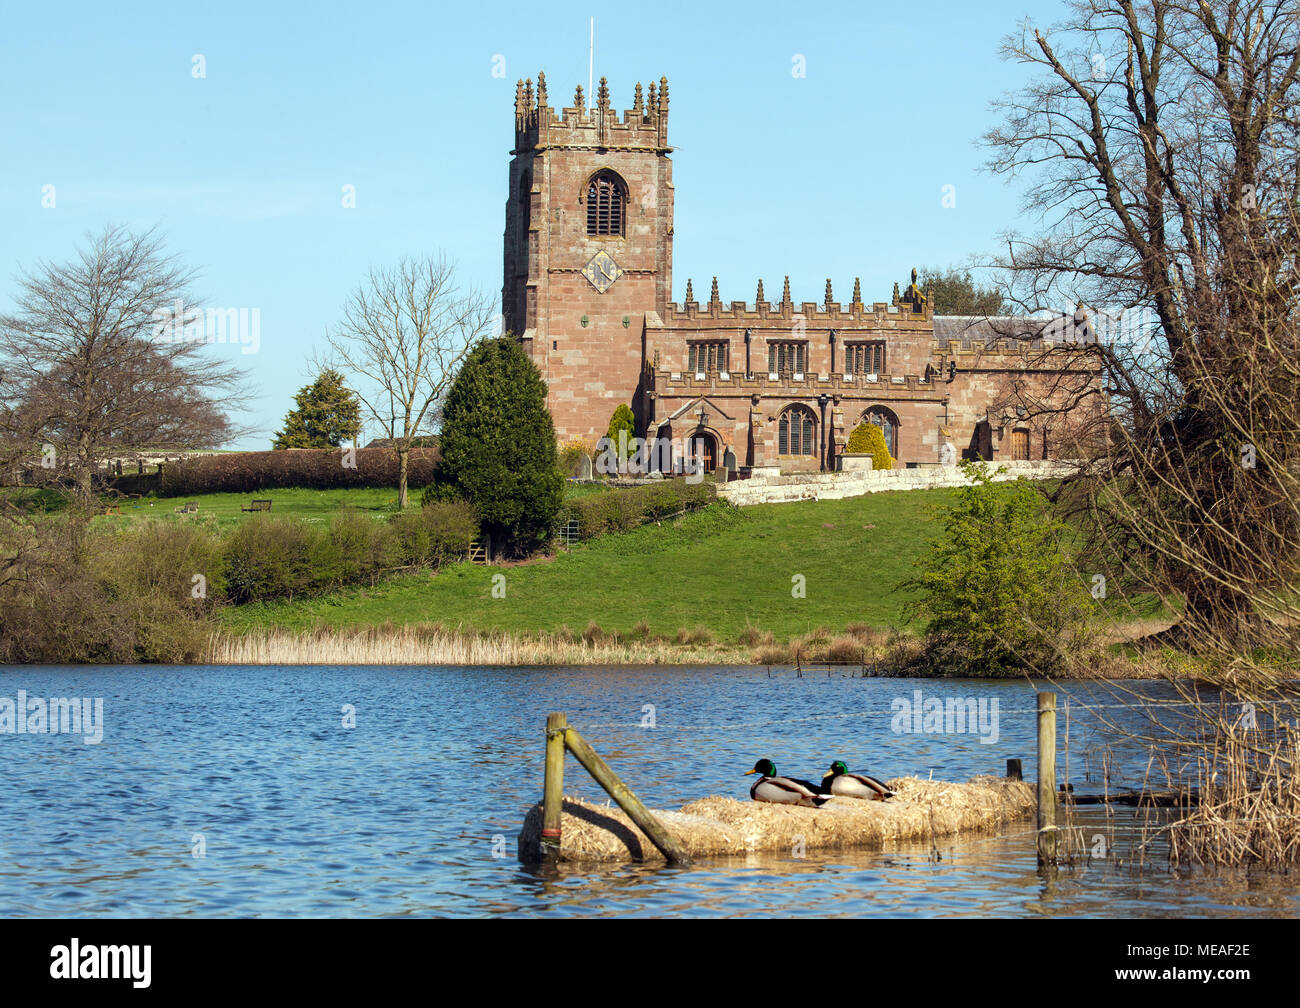 The Parish church of St Michael's on a hill  above Big Mere in the Cheshire village of Marbury set in rolling countryside and farmland with ducks Stock Photo